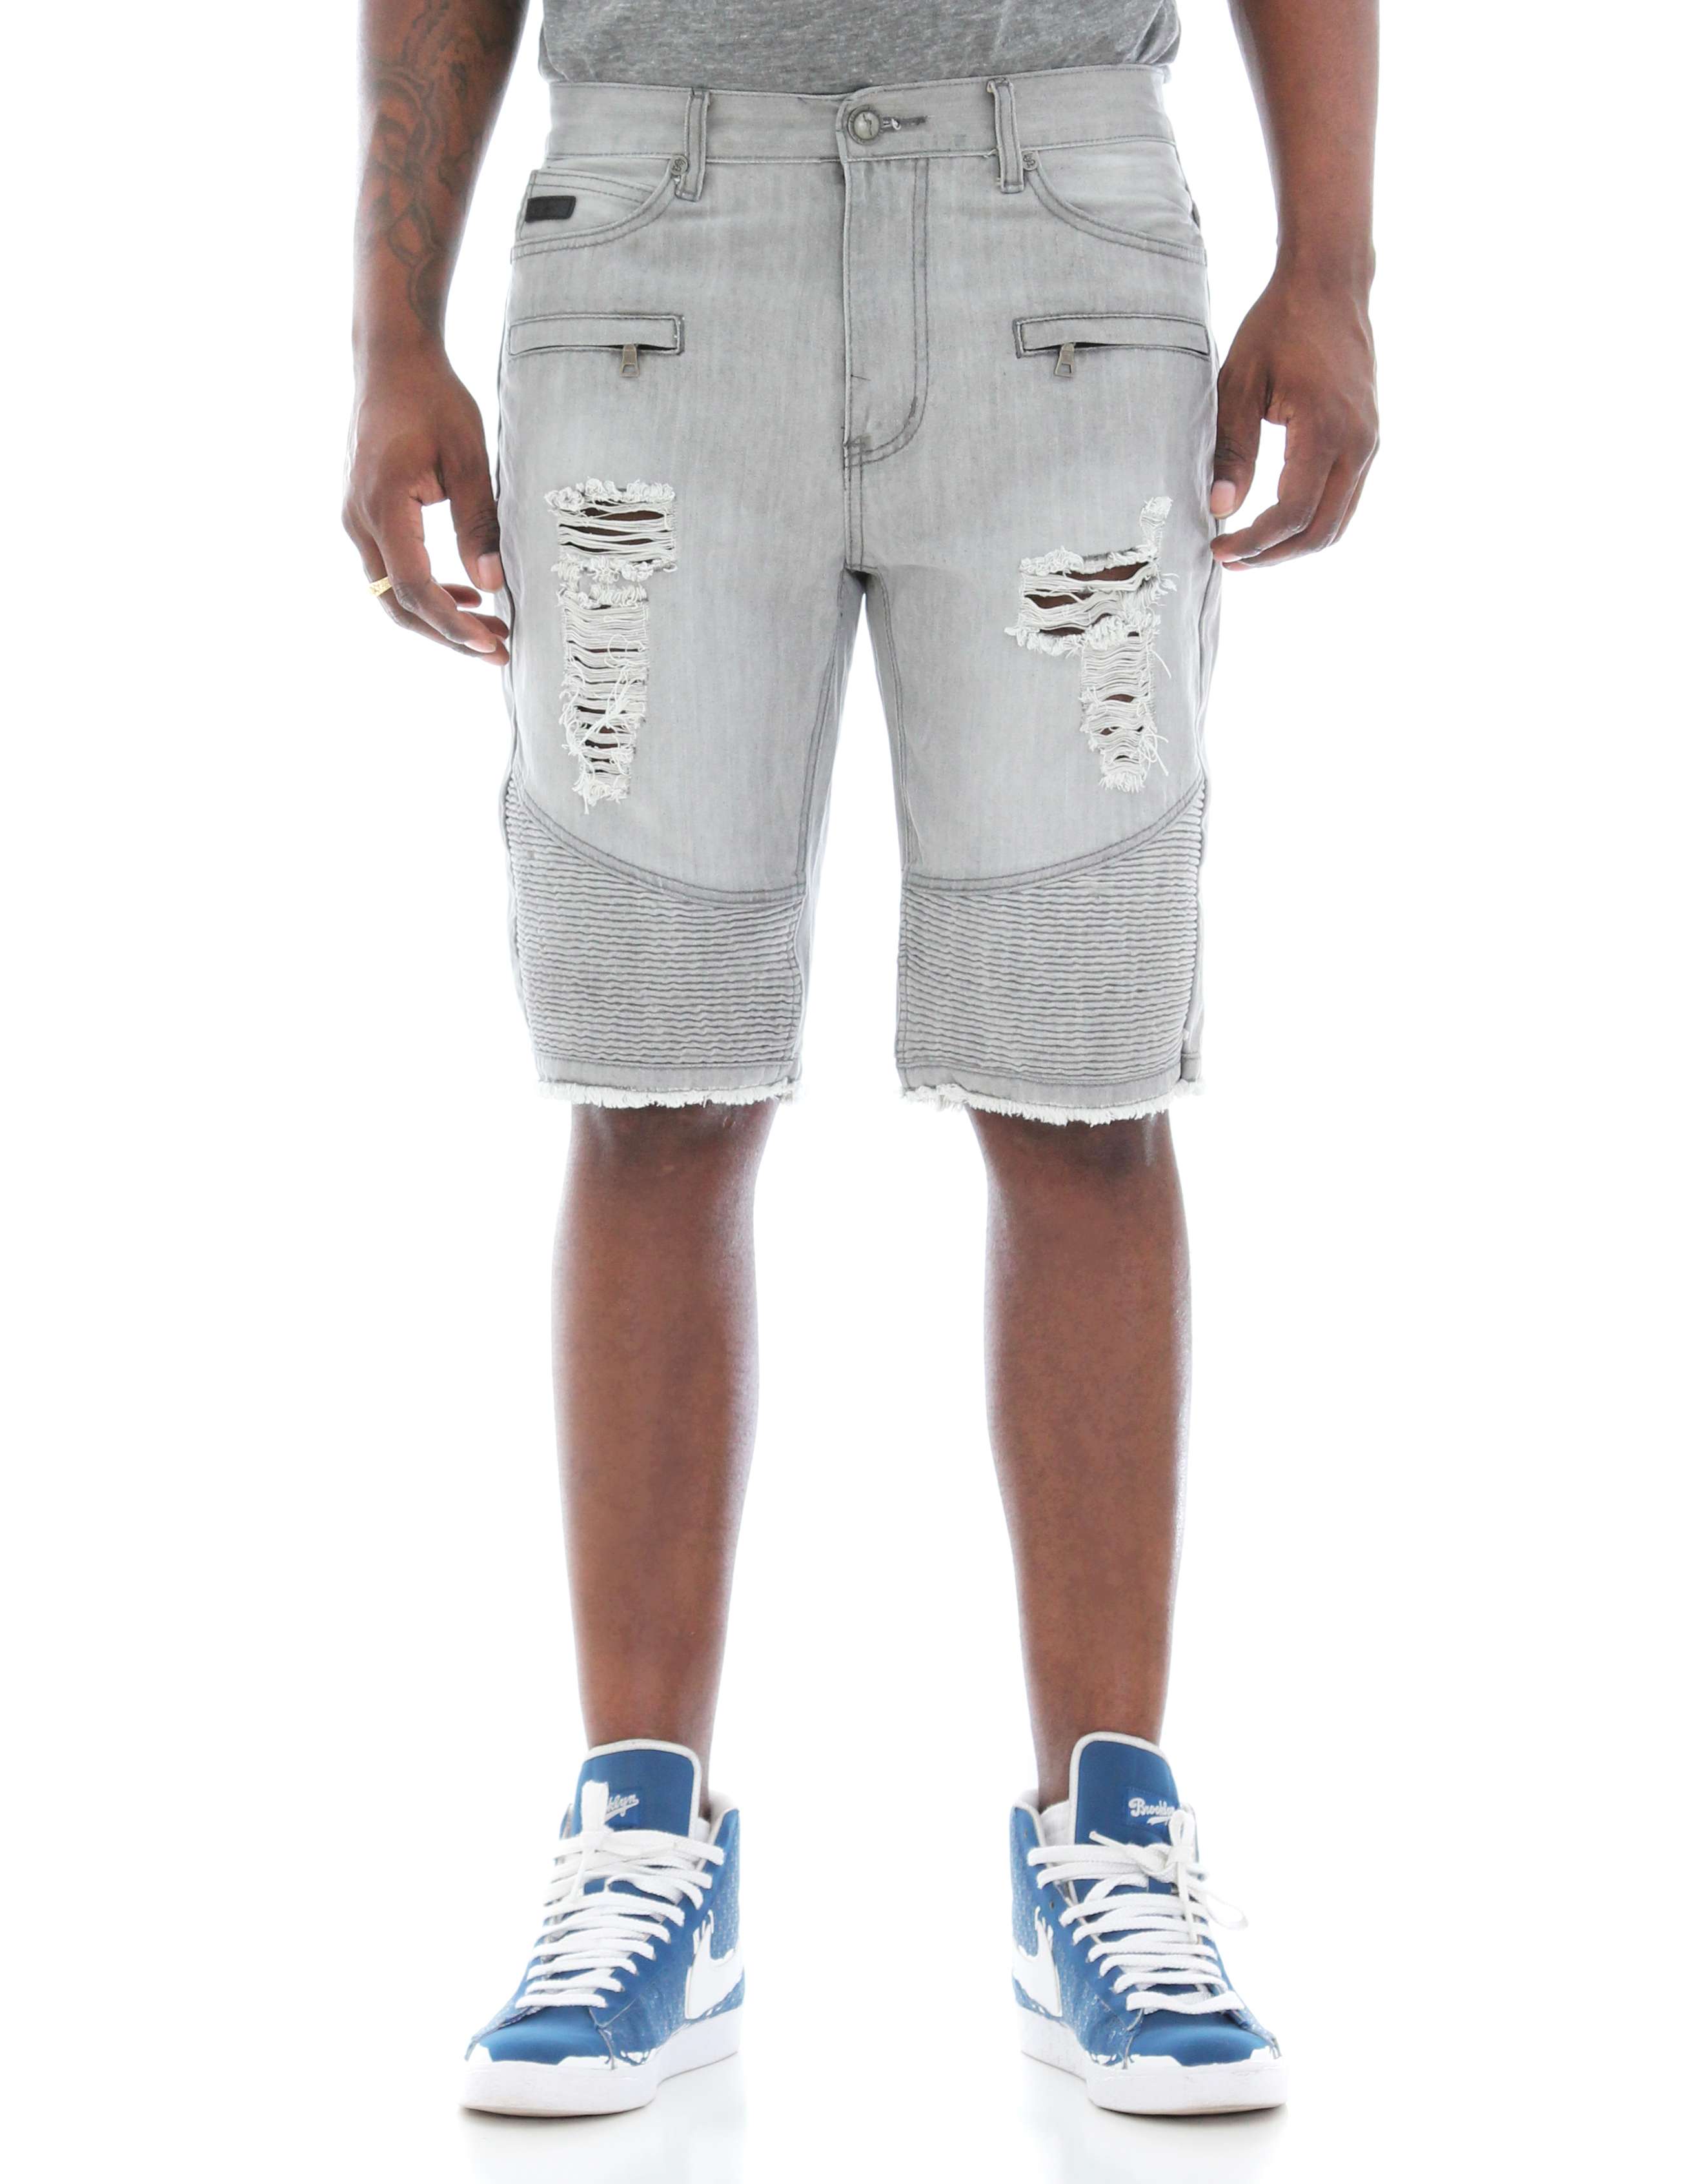 Southpole Mens Denim Shorts with Destructed Backed Ripped and Repaired Denim Shorts